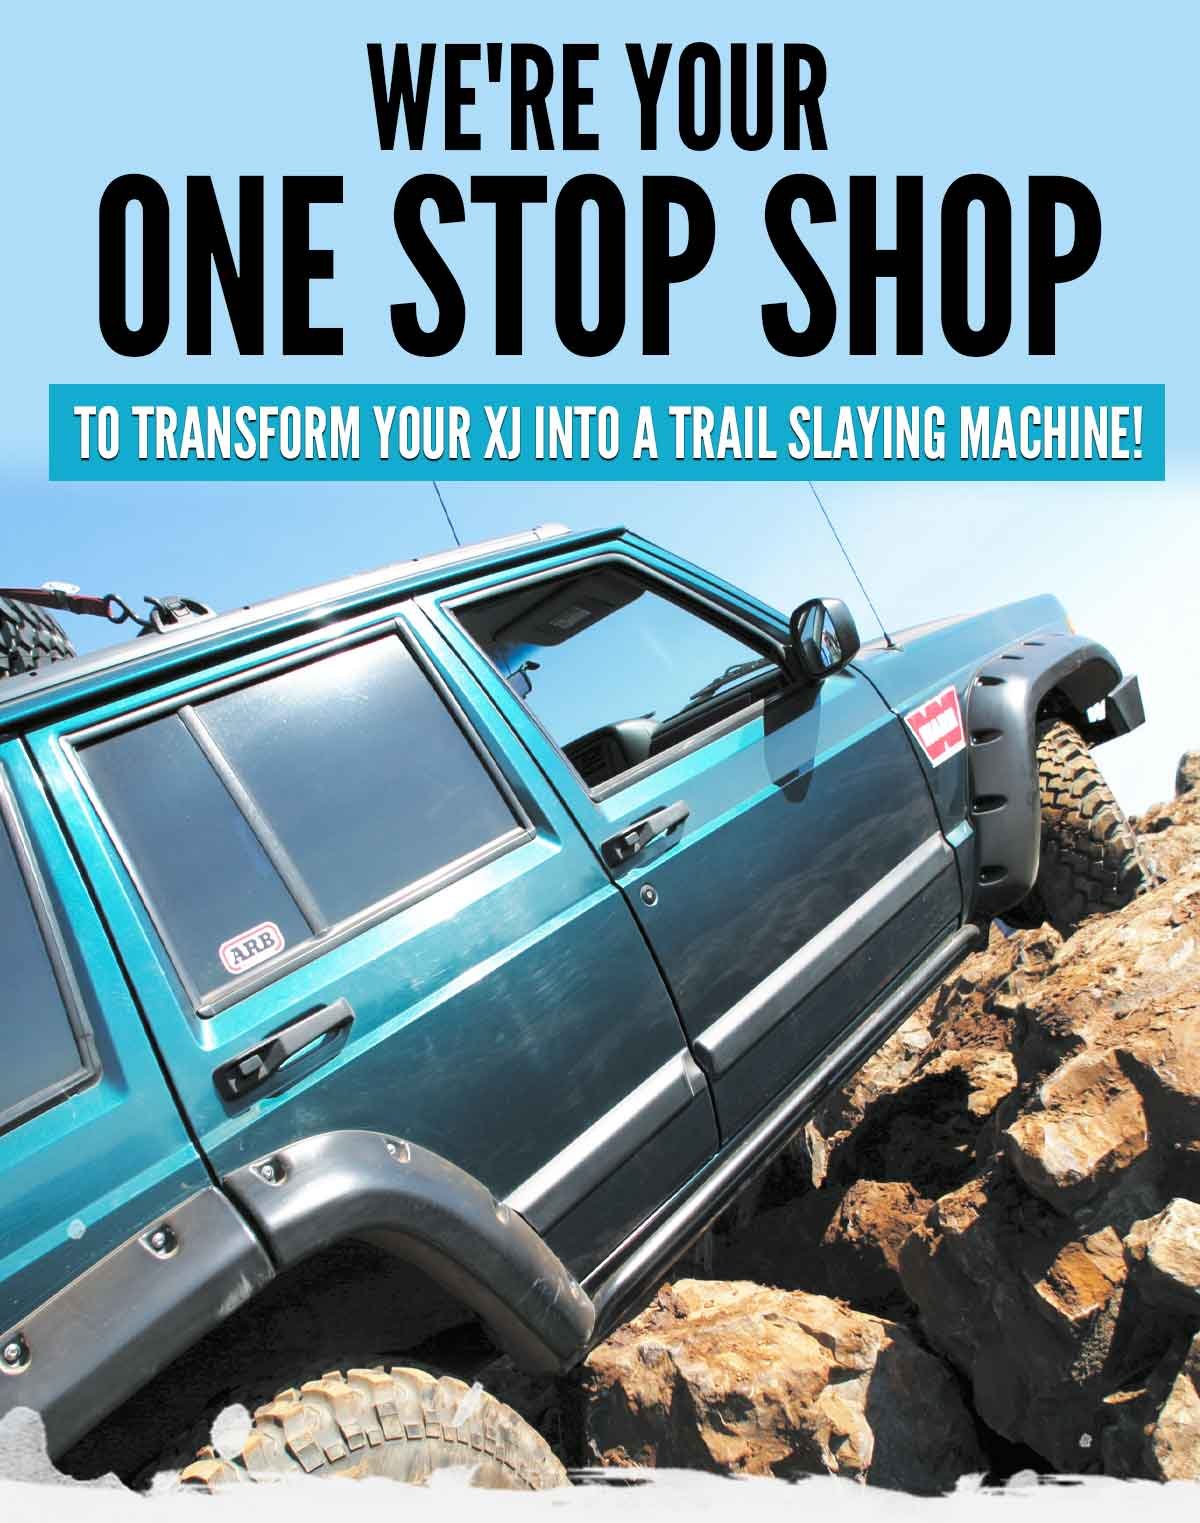 We're Your One Stop Shop To Transform Your XJ Into A Trail Slaying Machine!